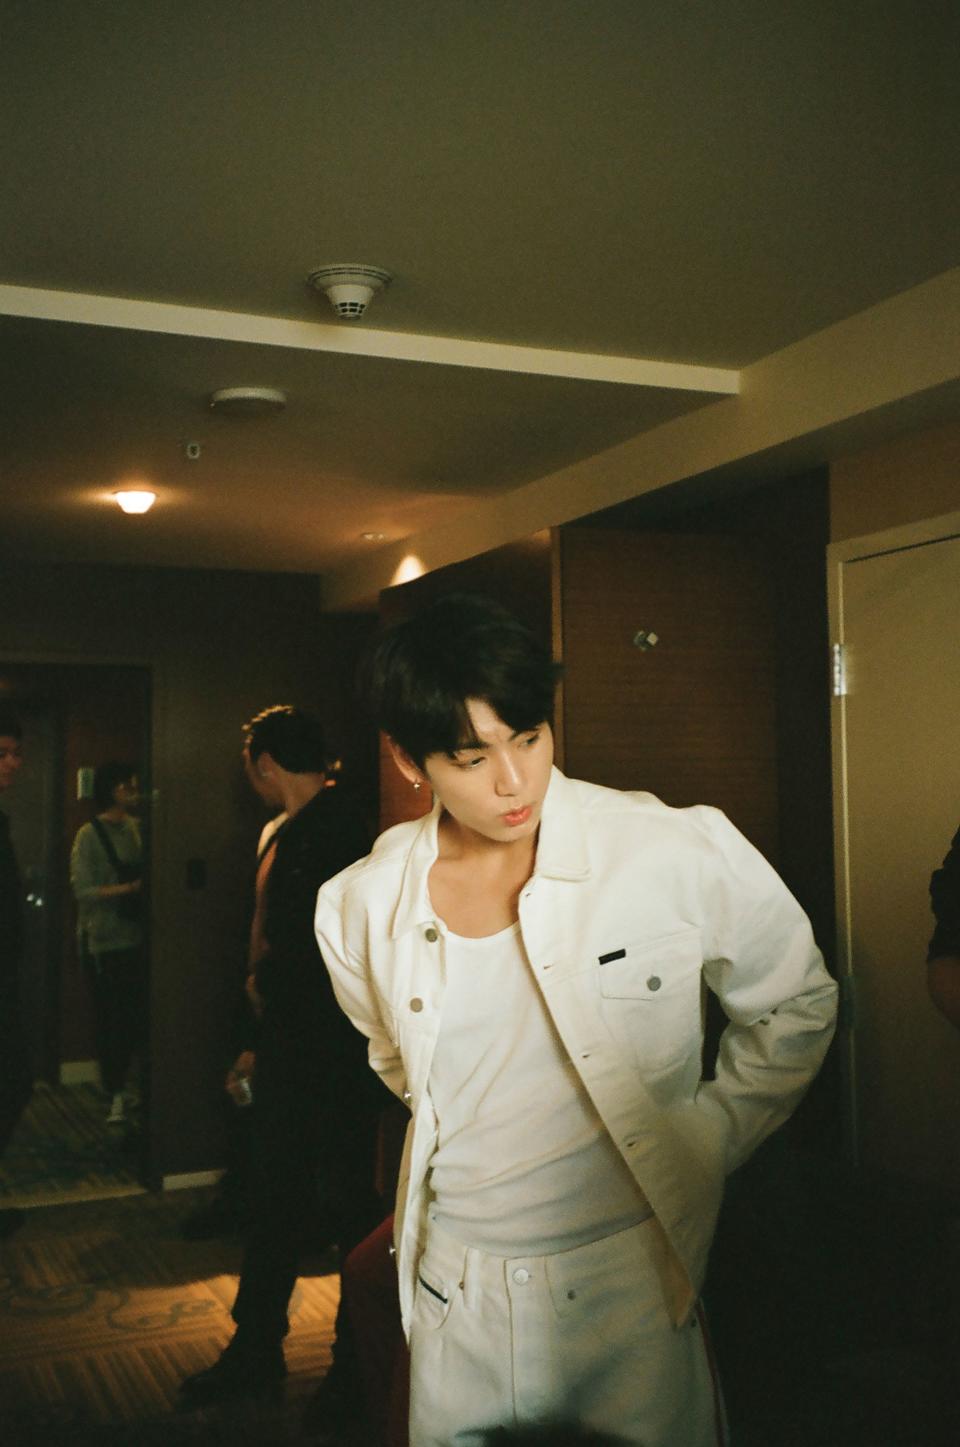 Jungkook getting ready to go.